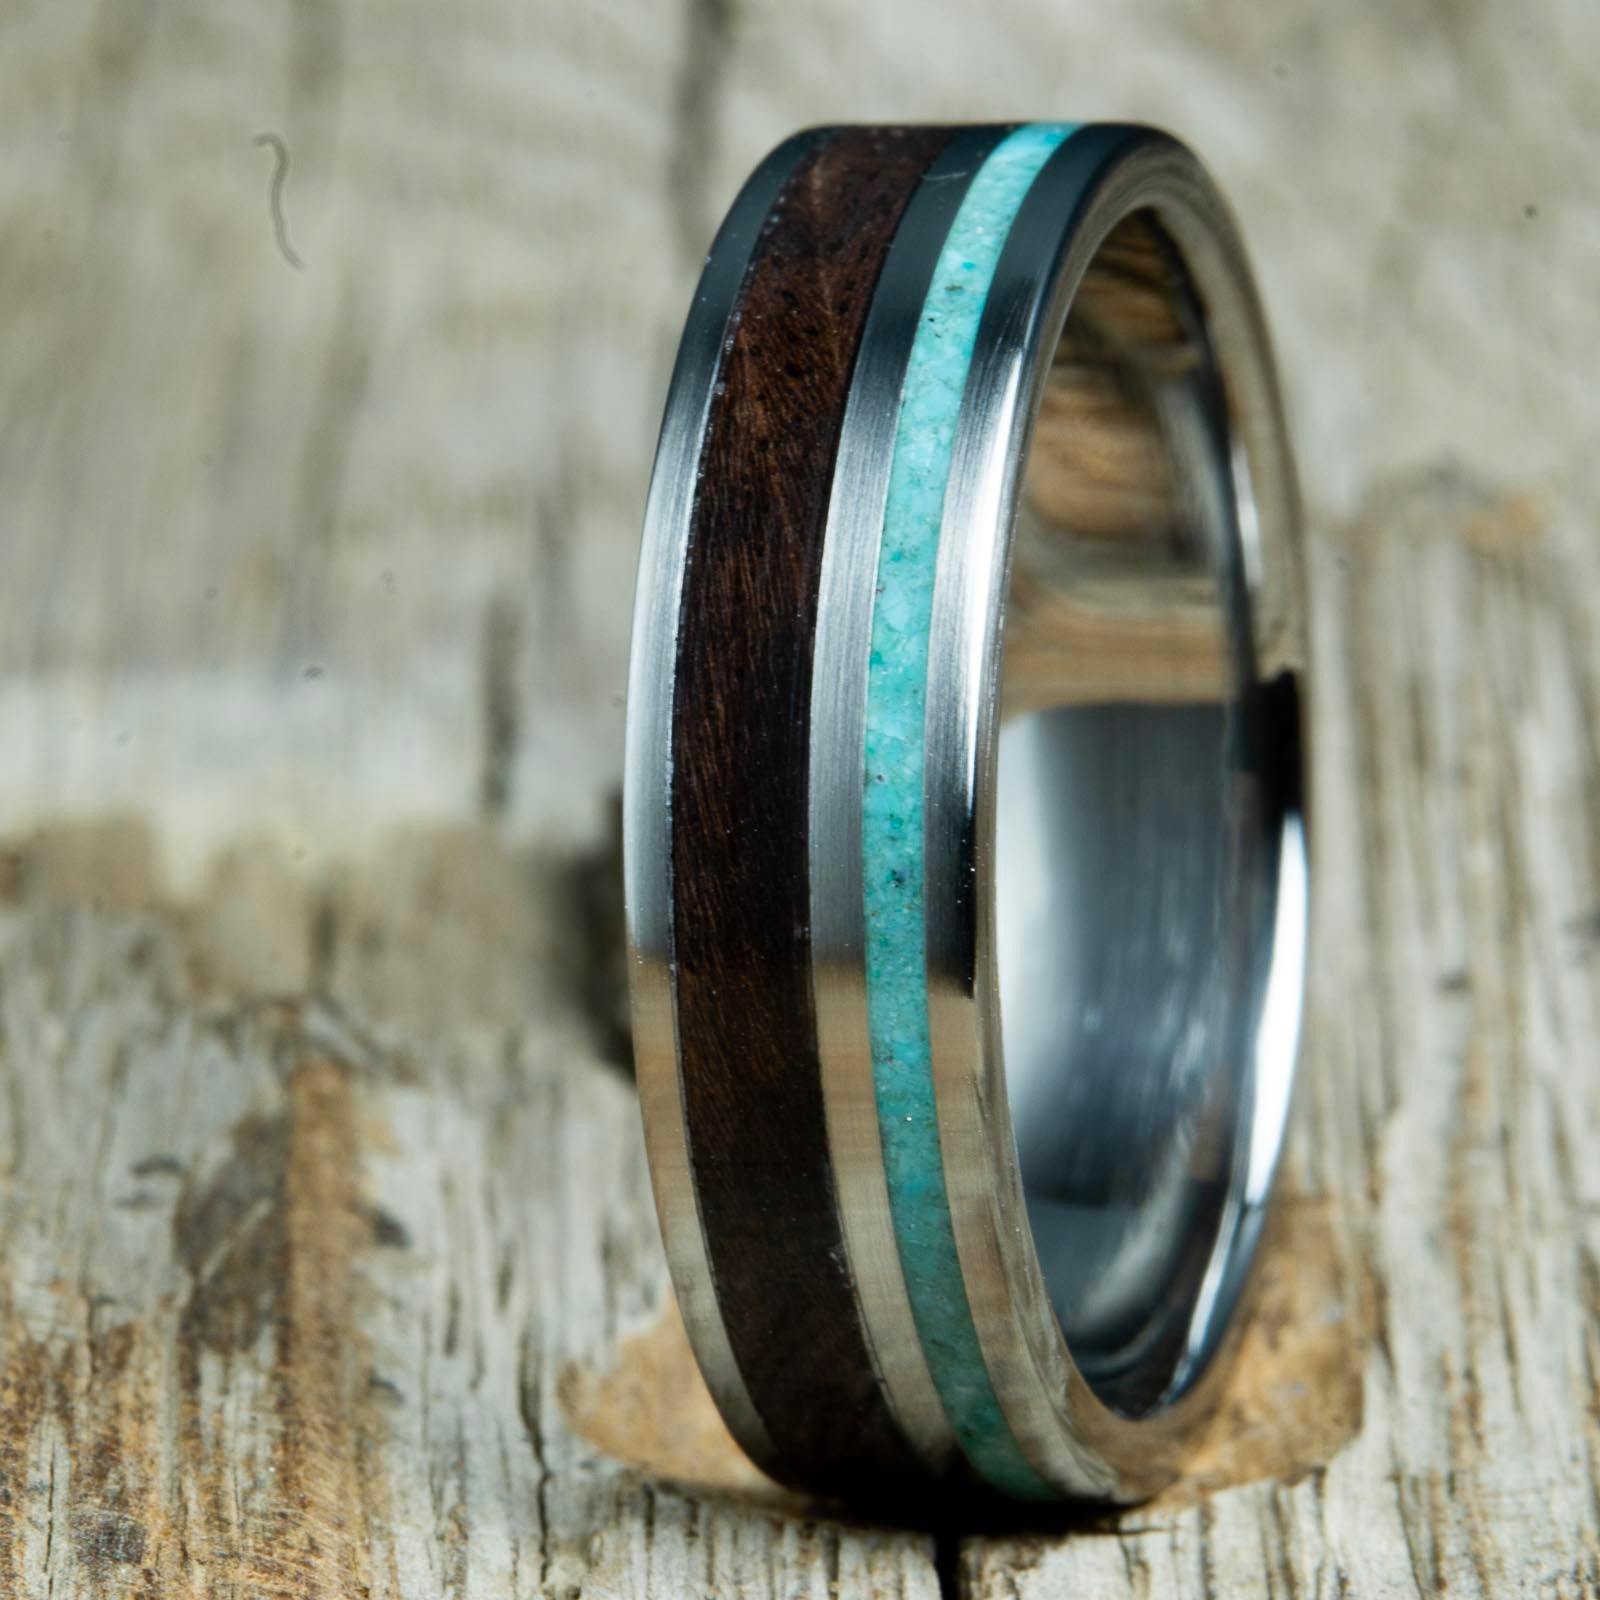 Walnut and turquoise wooden wedding bands